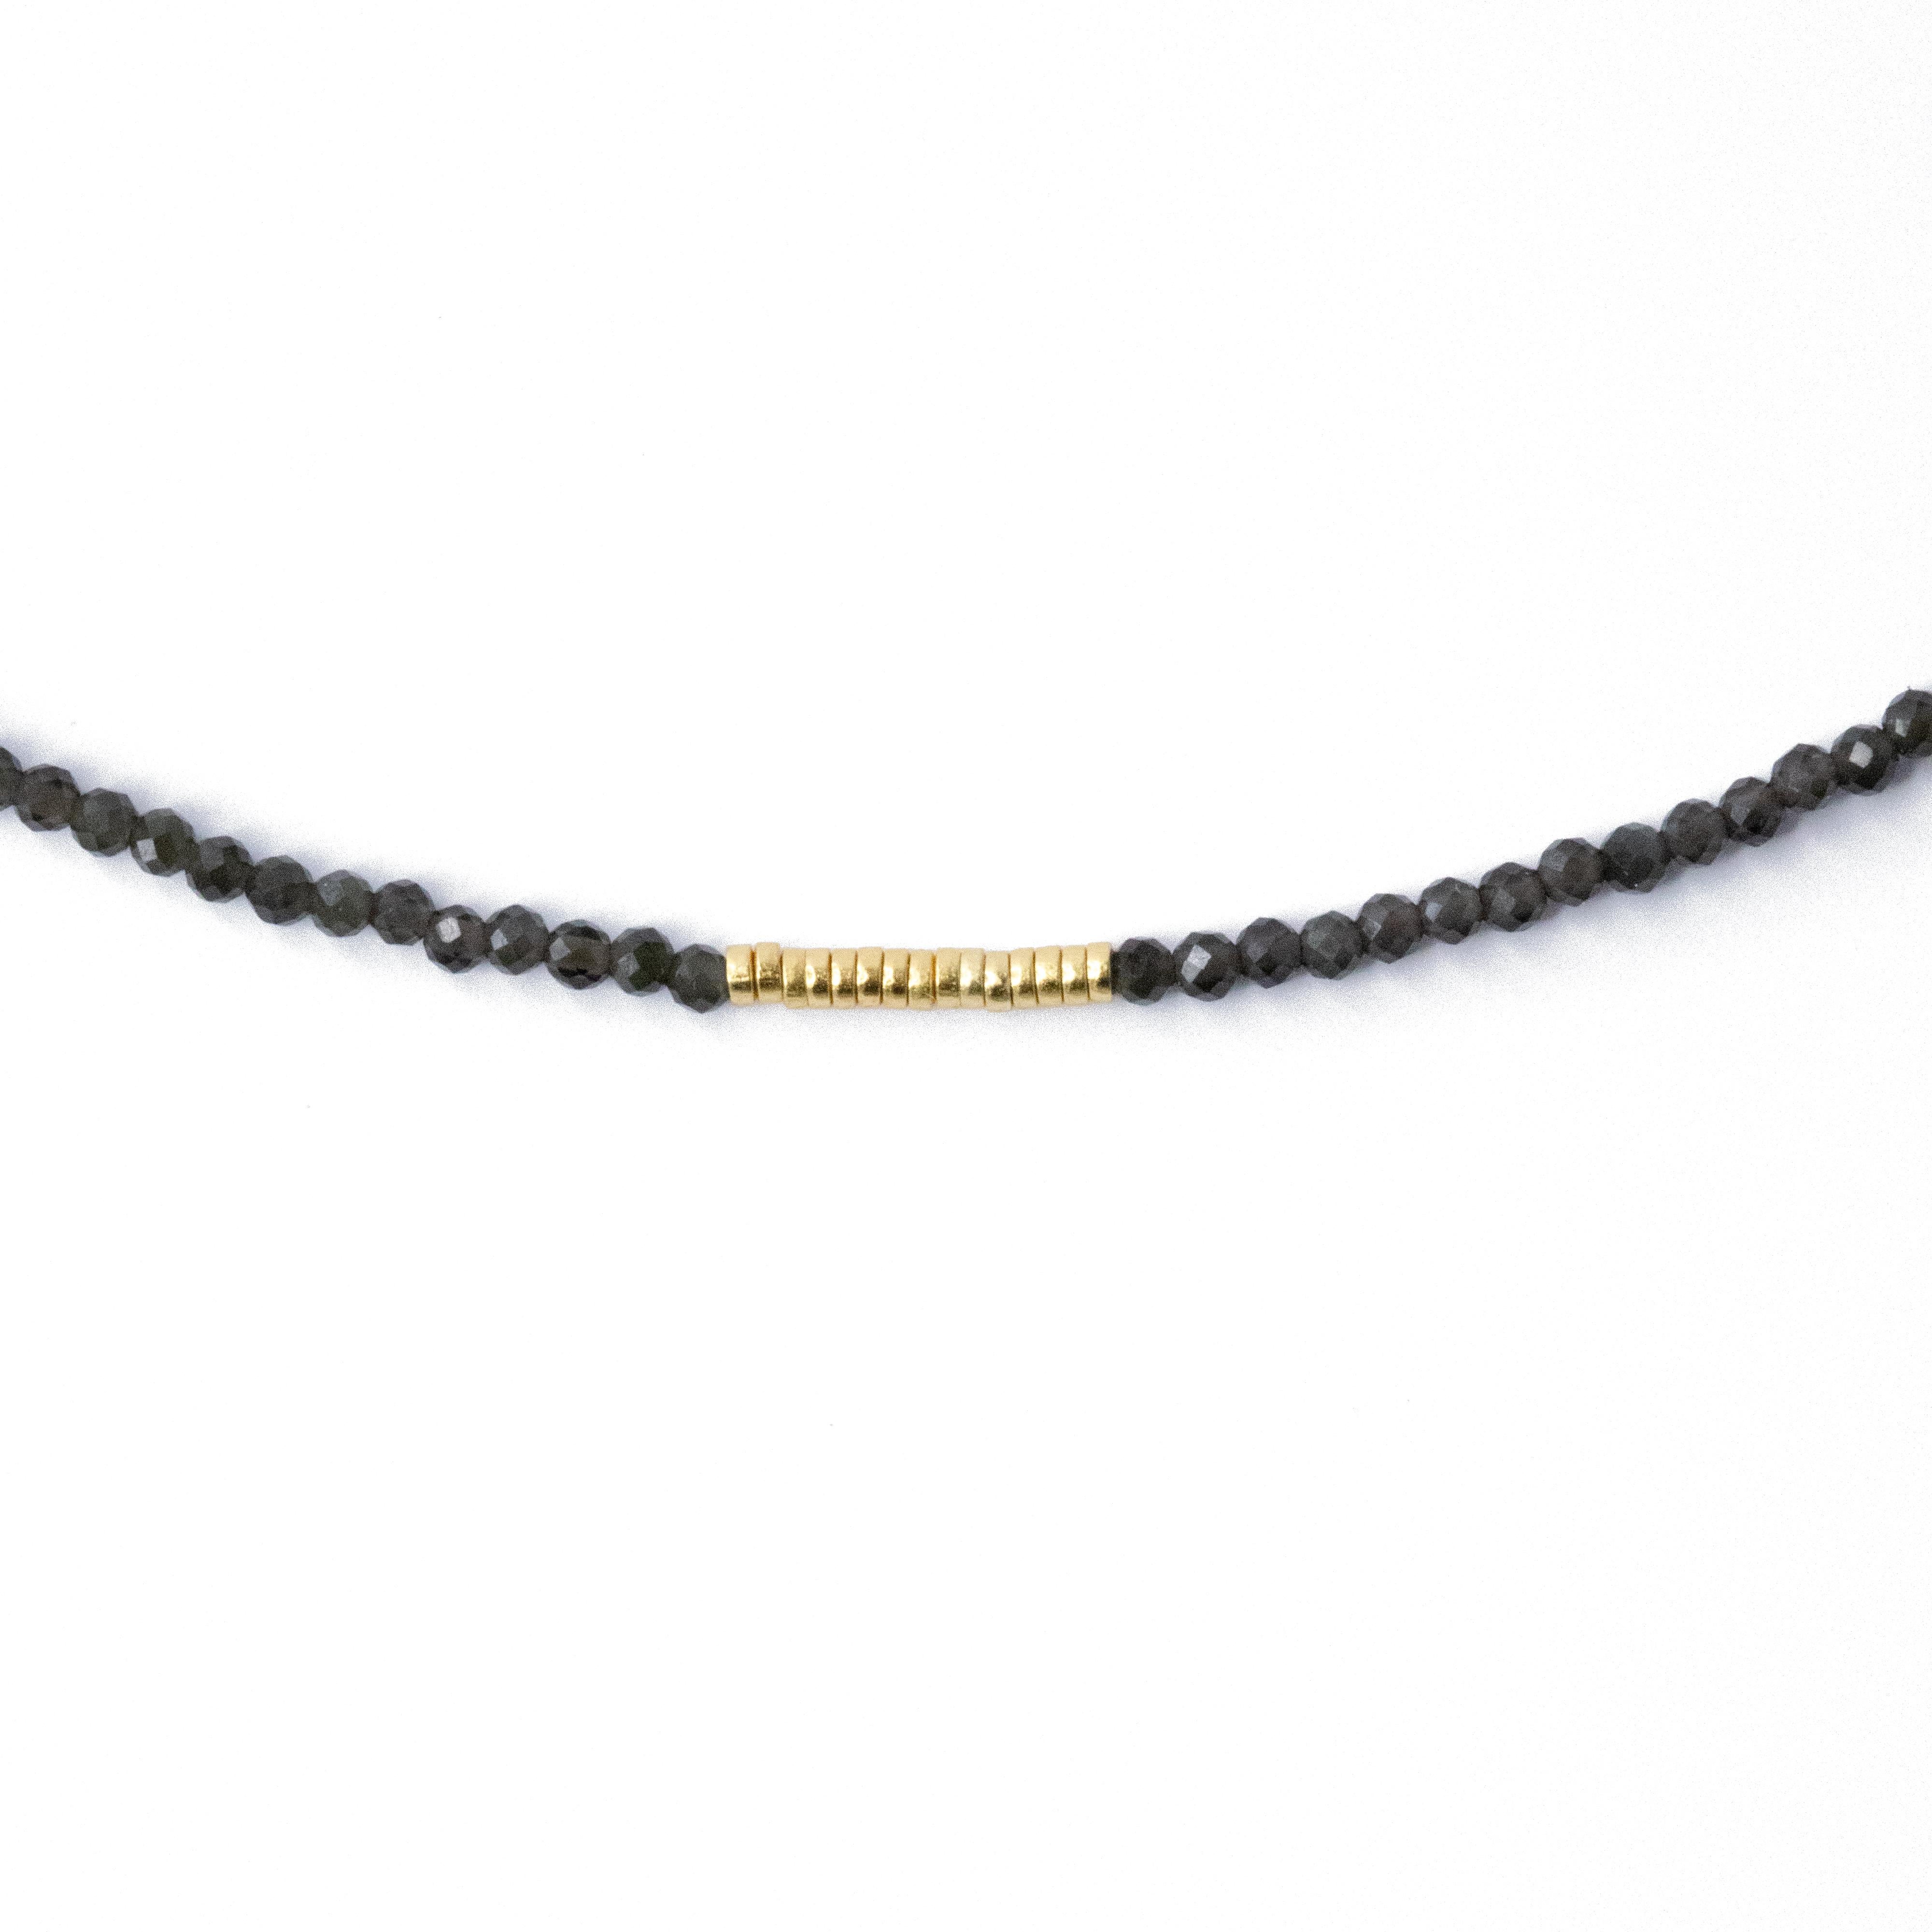 This delicate Tiny Charcoal Obsidian Necklace is a perfect addition to any jewelry collection. The Shiny Grey Mika is made with high-quality gold beads and features a stunning Obsidian Faceted stone that adds a touch of elegance to any outfit.

17